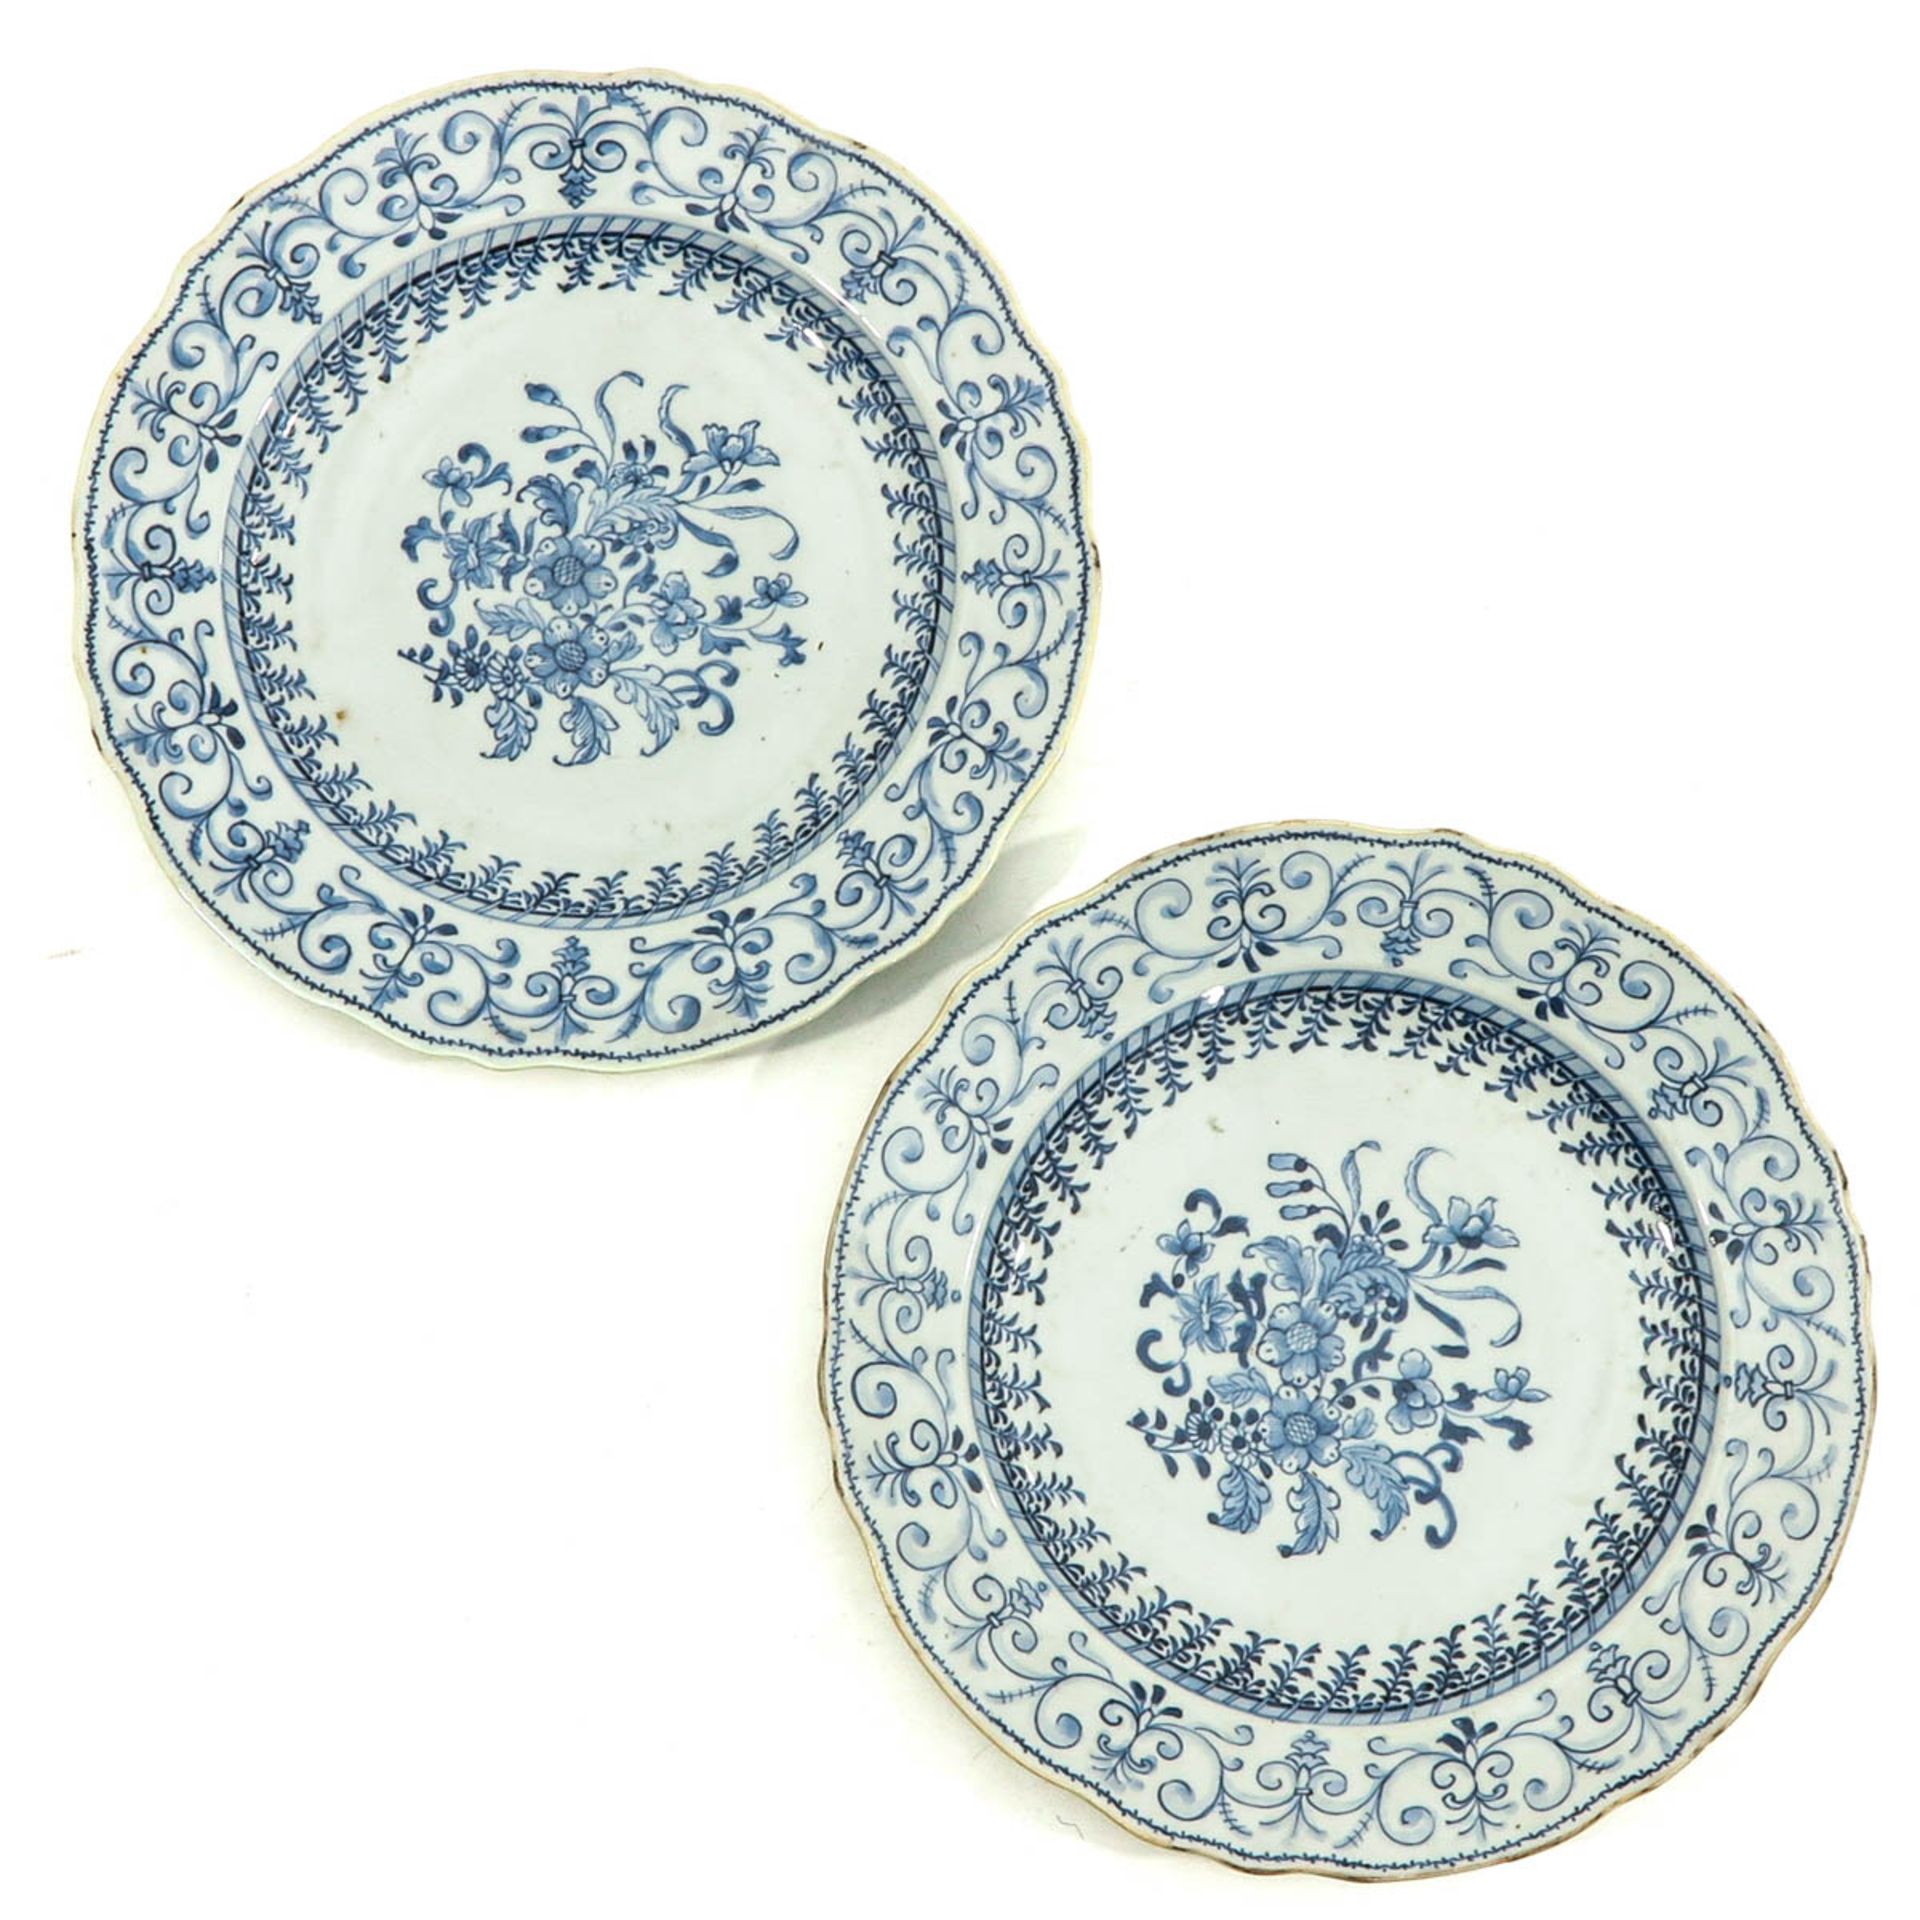 A Series of 5 Blue and White Plates - Bild 5 aus 10